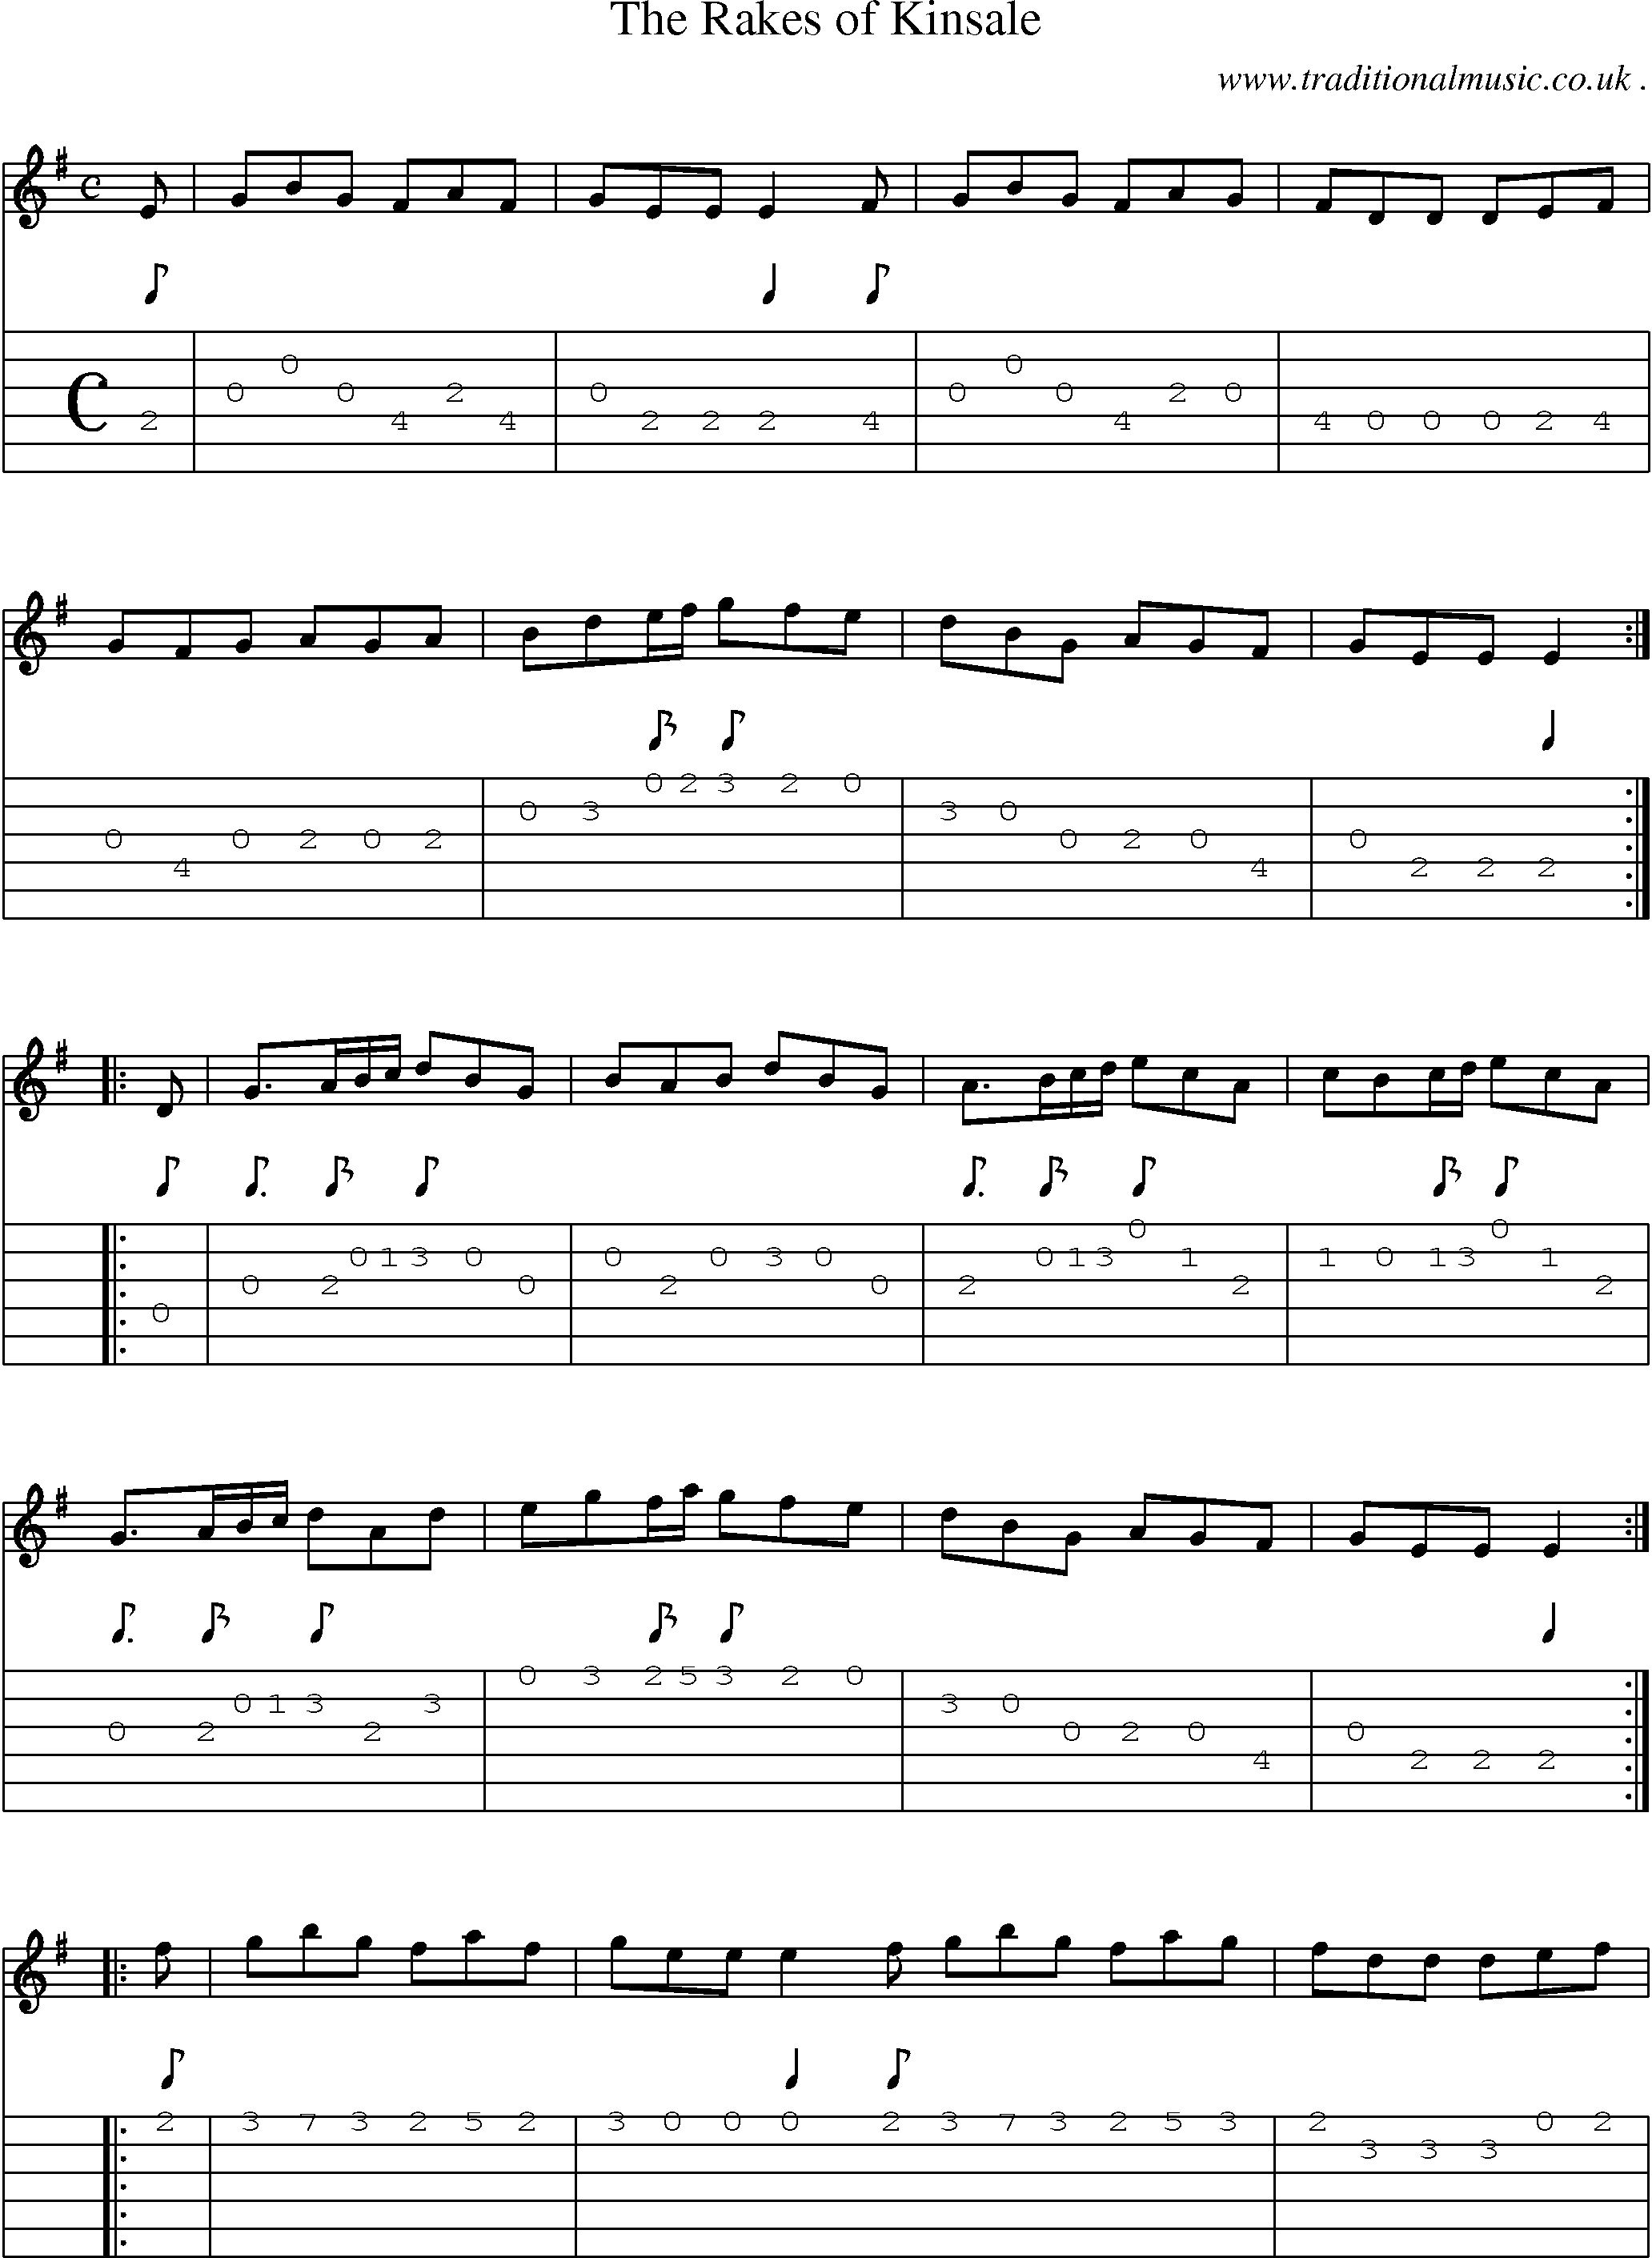 Sheet-Music and Guitar Tabs for The Rakes Of Kinsale